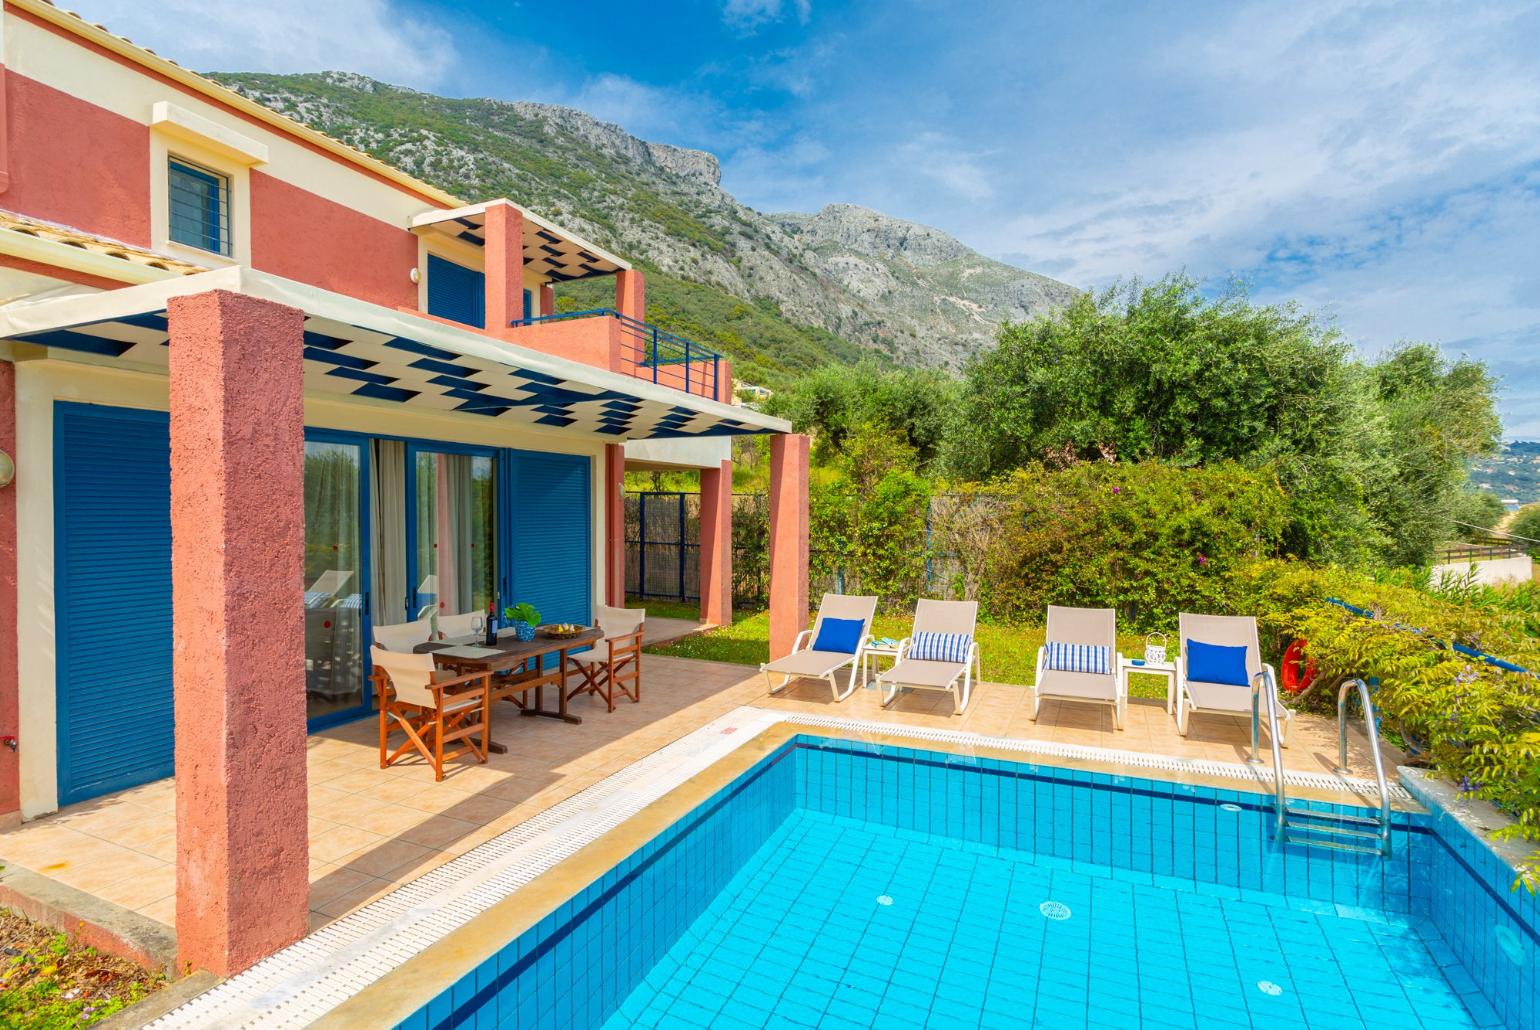 Beautiful villa with private pool and terrace with mountain views